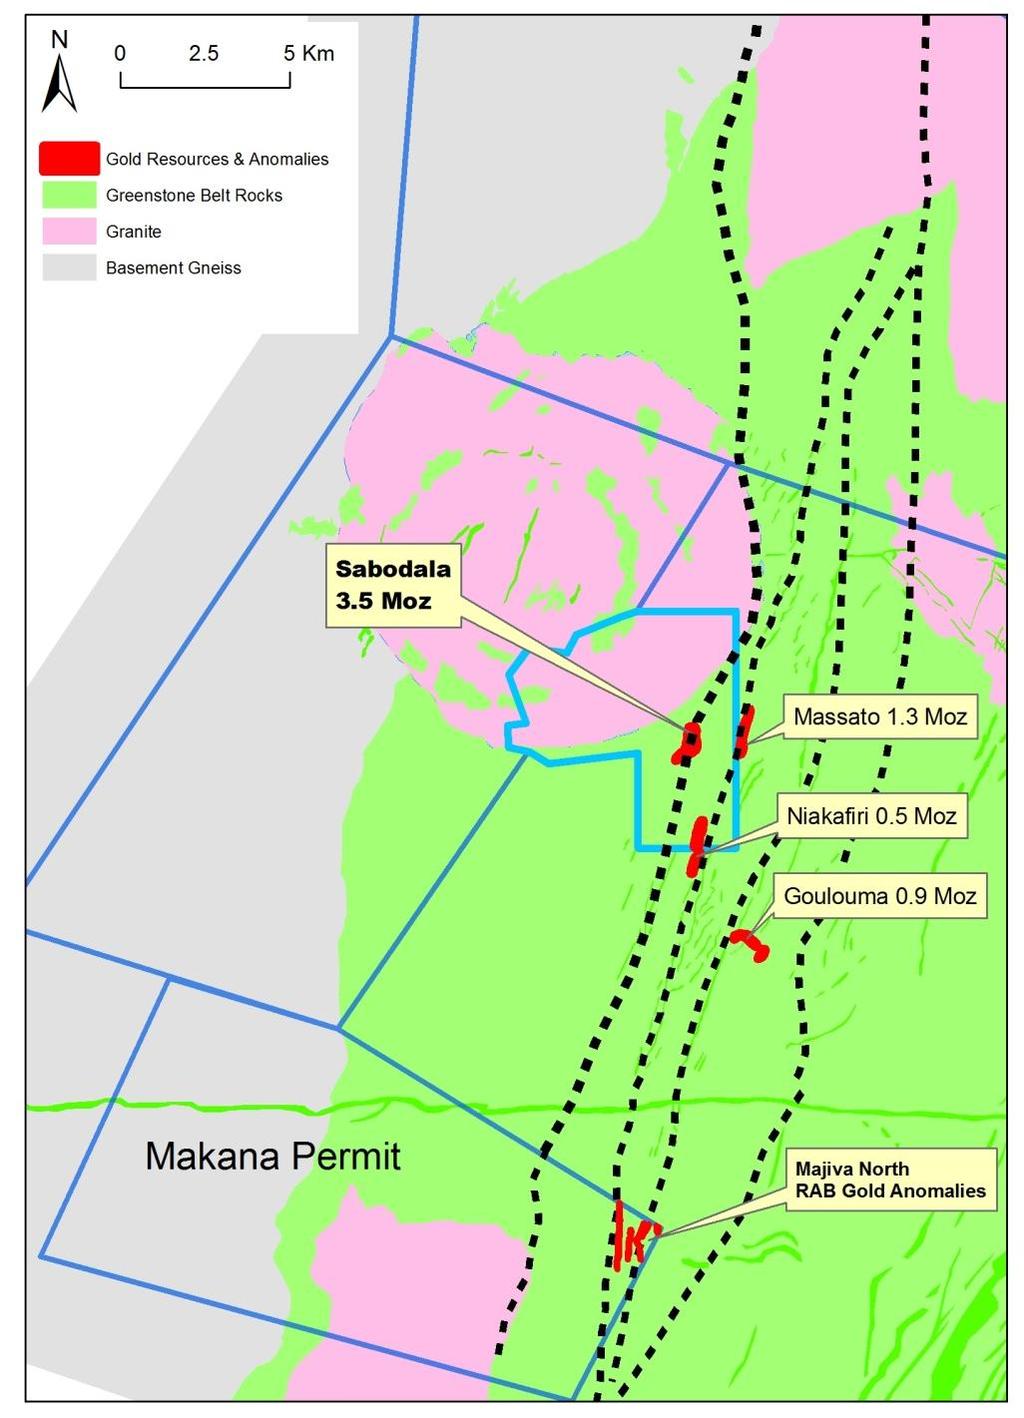 Makana Extension of Sabodala Structures Located on southern strike extension of Sabodala shear corridor Prospectively enhanced by late granite plug and large volume of felsic intrusives Major